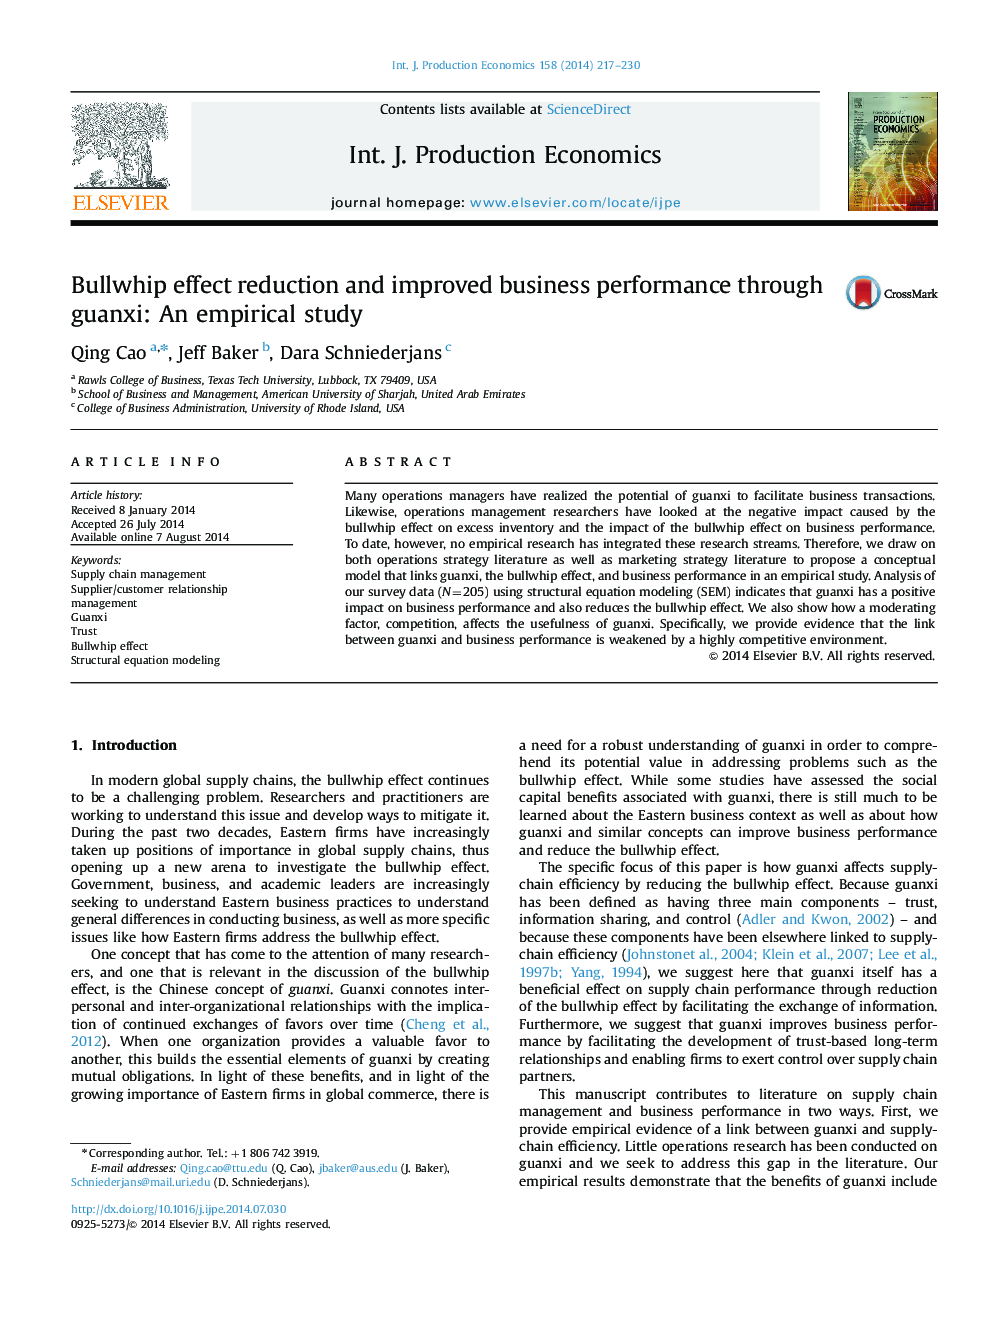 Bullwhip effect reduction and improved business performance through guanxi: An empirical study